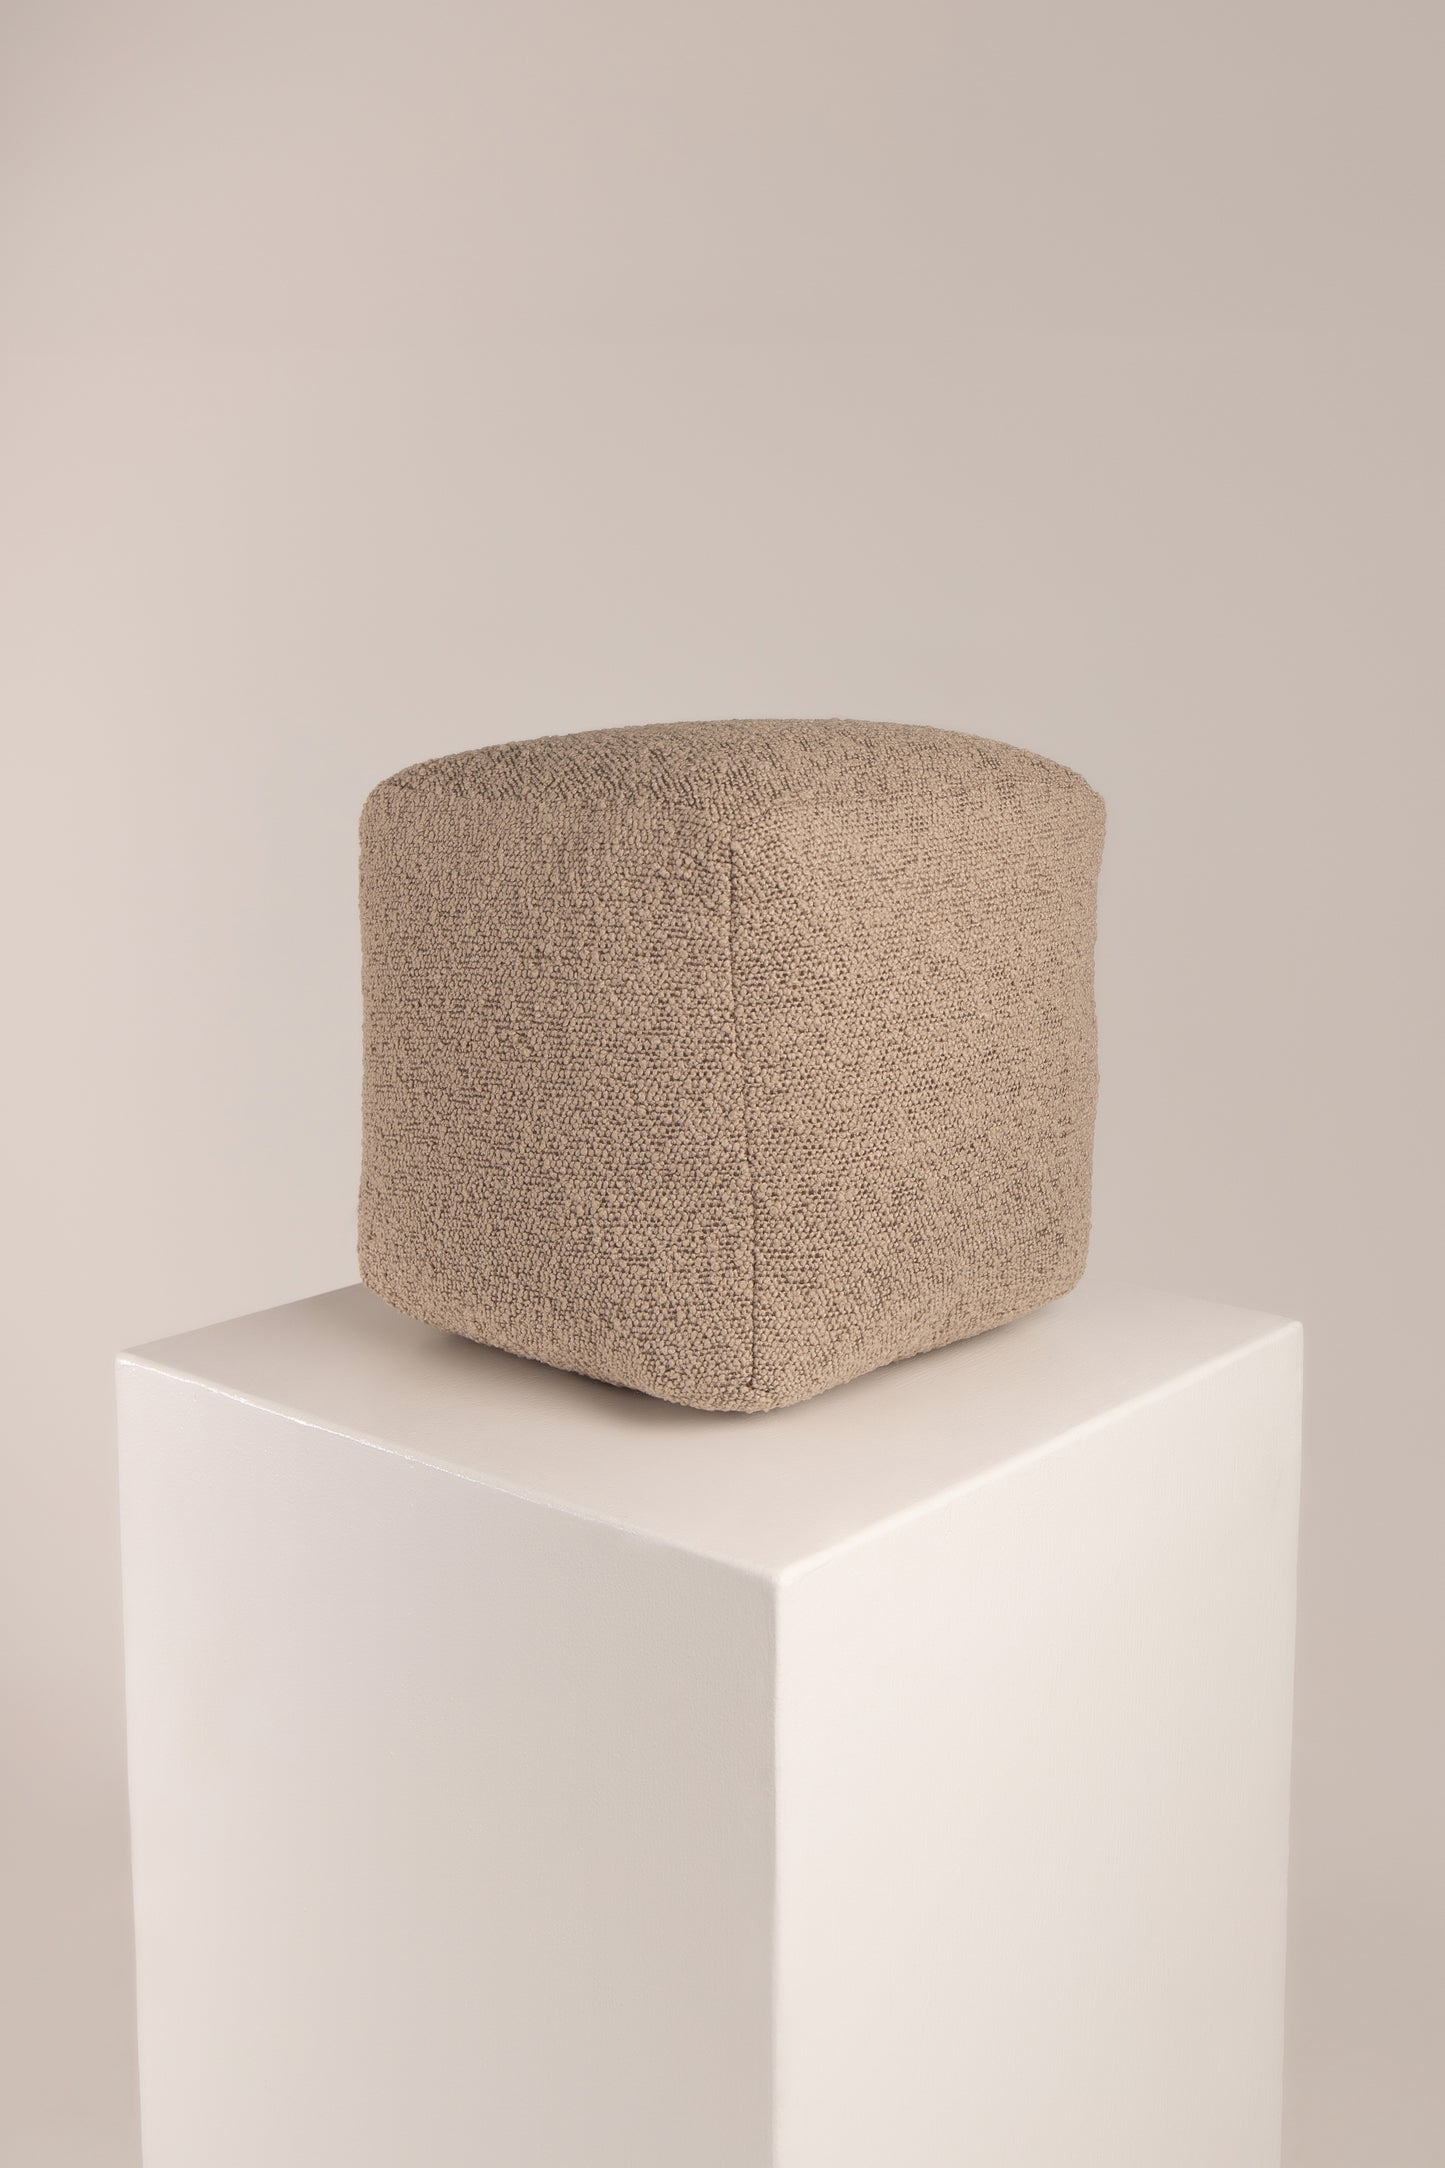 The CUBE scatter in beige boucle